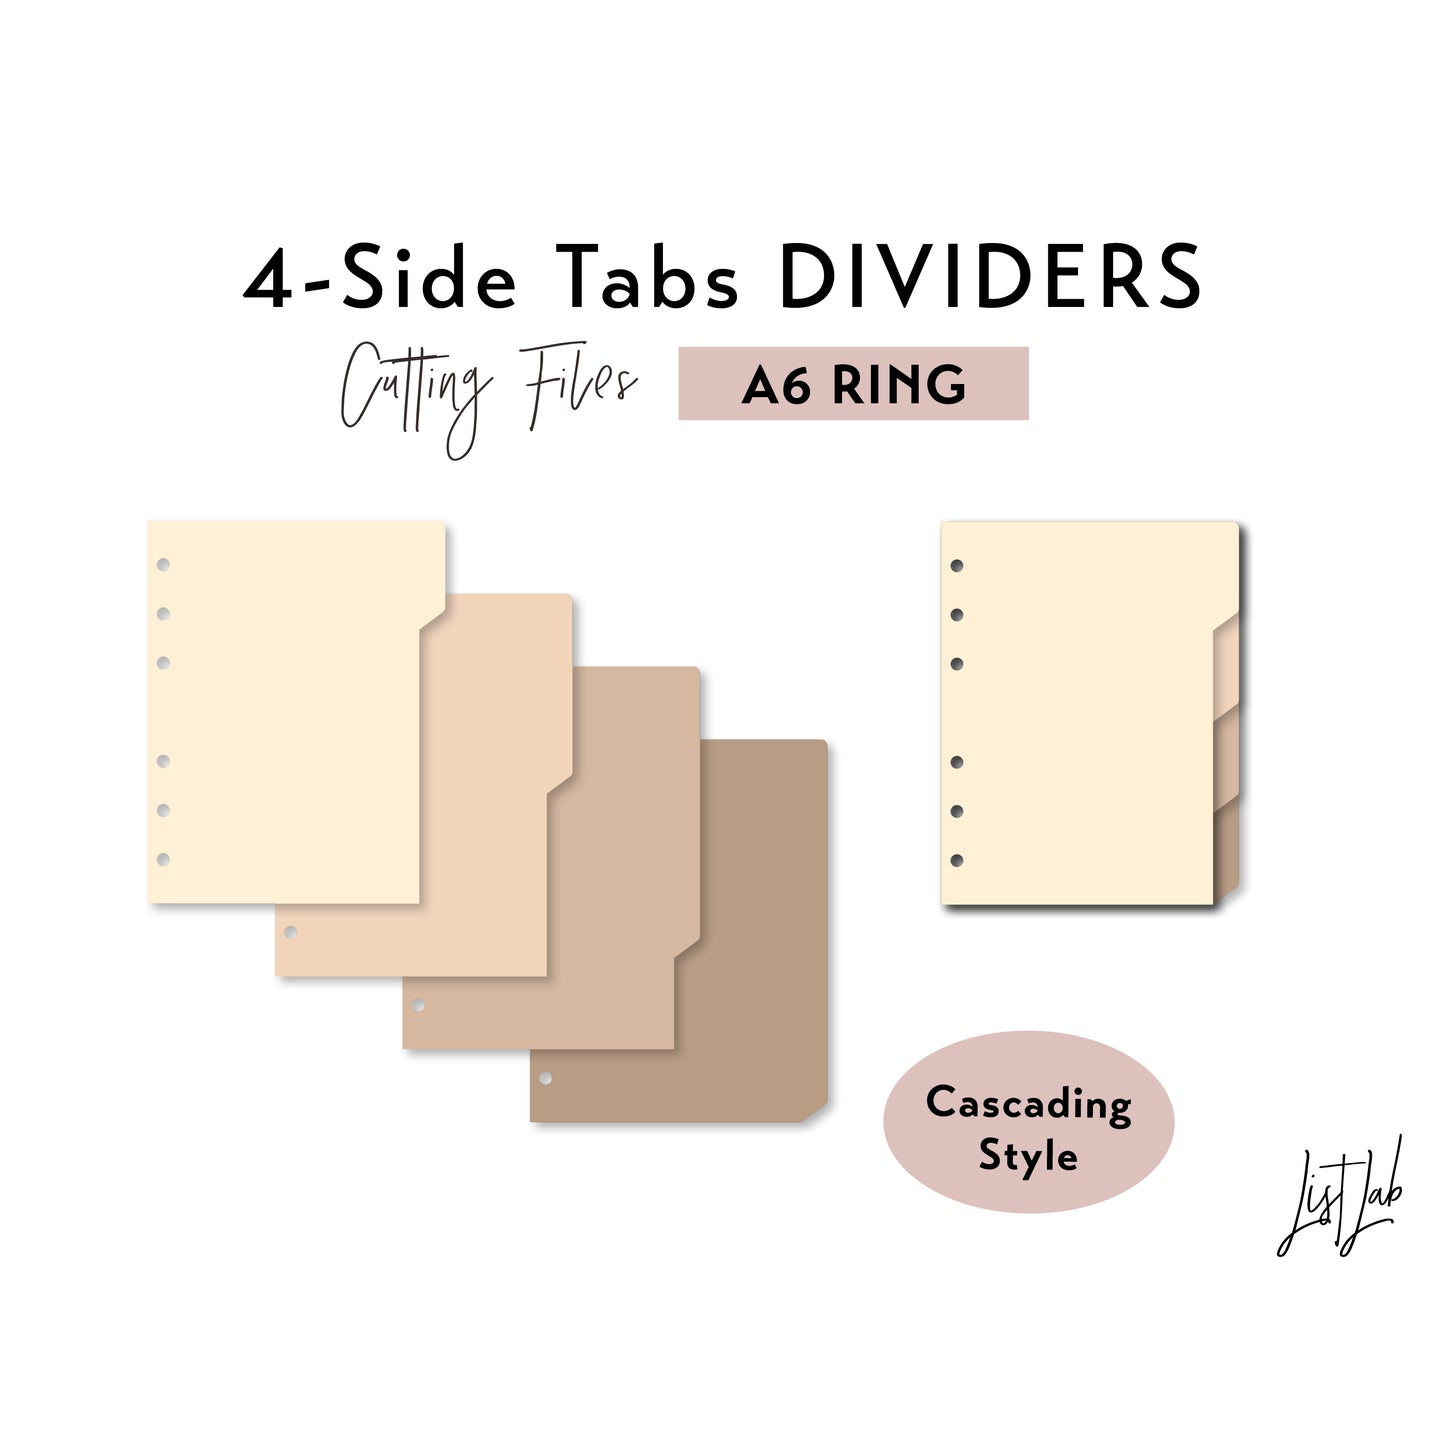 A6 Ring size 4-SIDE Cascading Tab Dividers Cutting Files Set